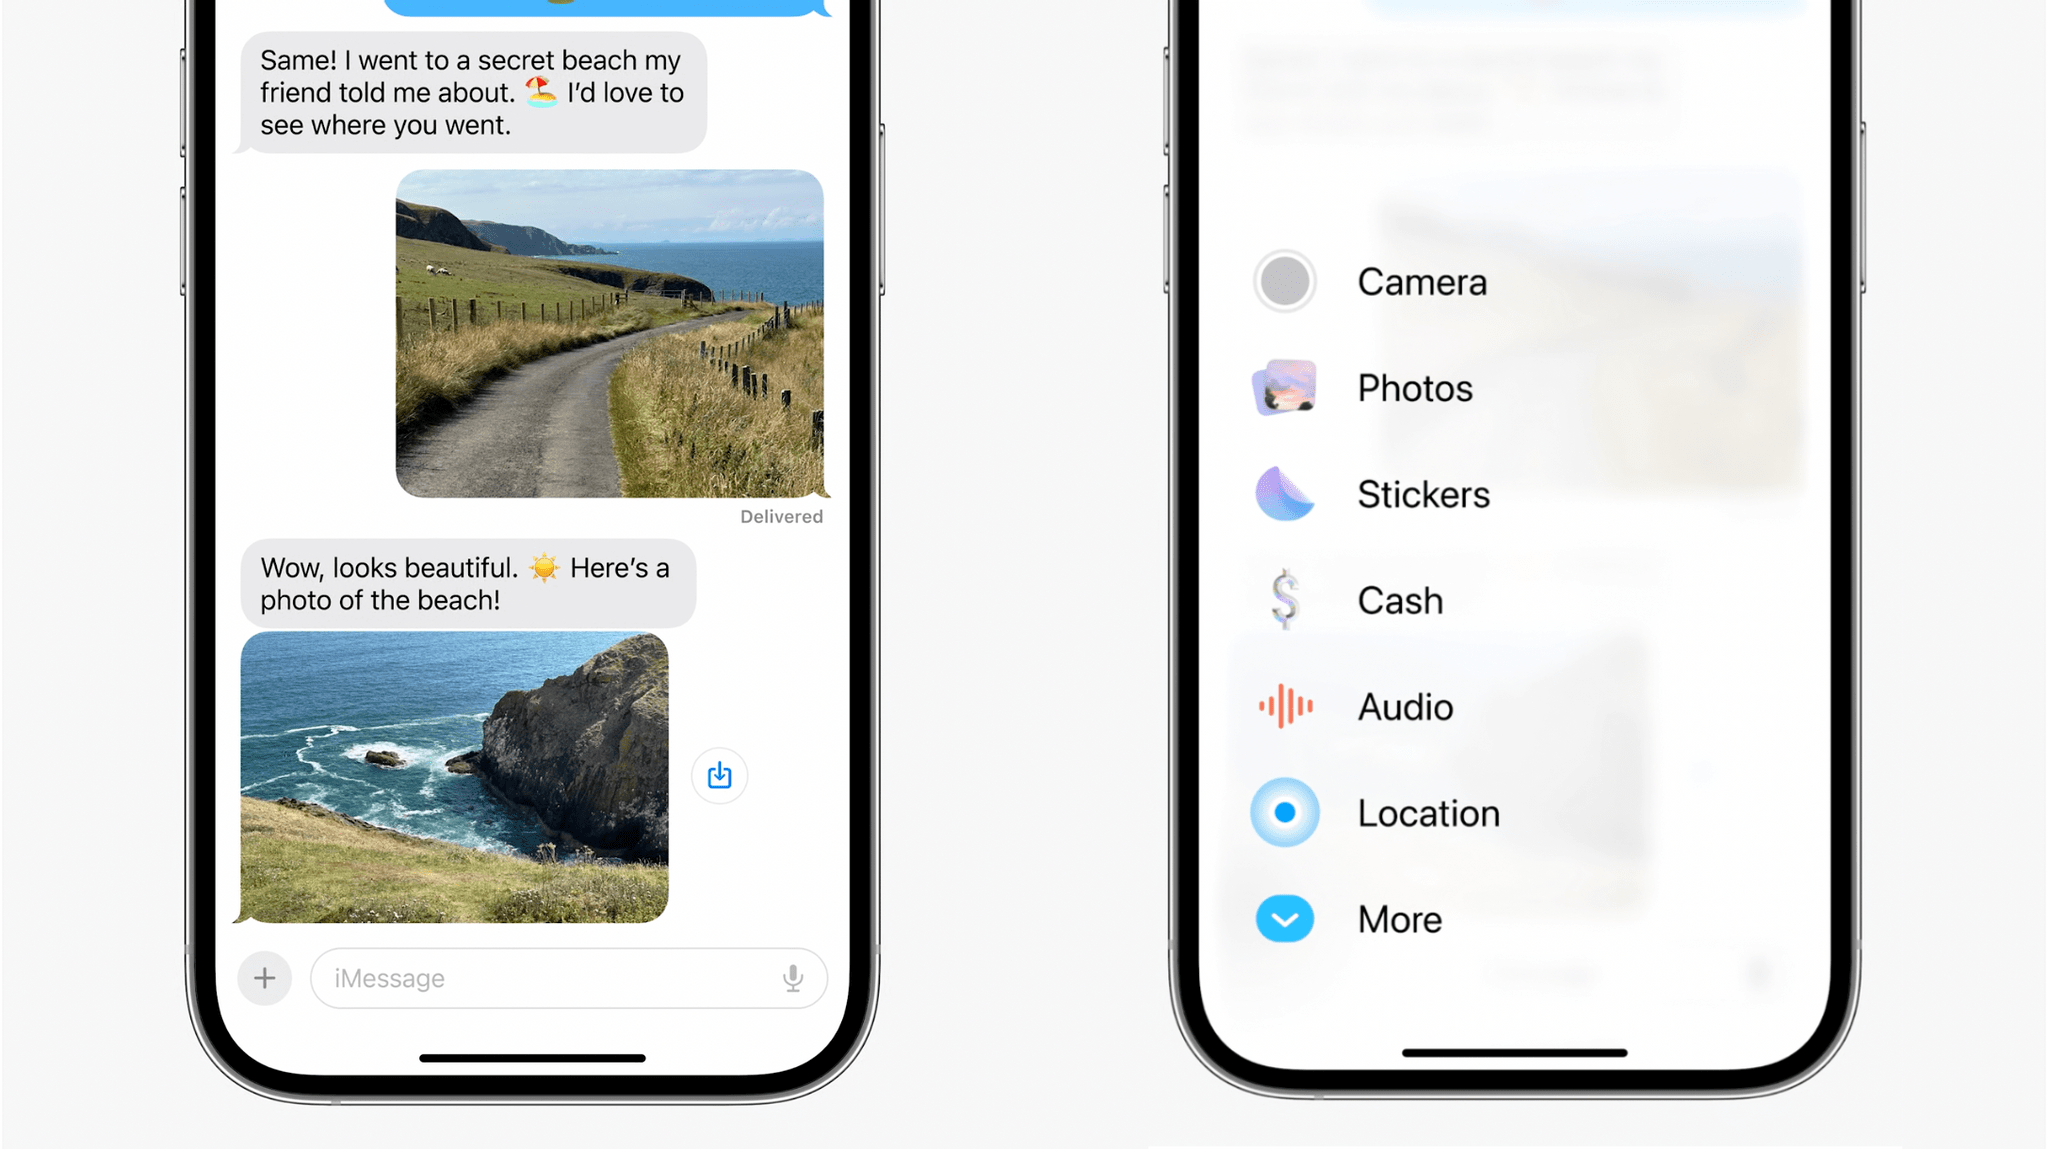 Left: the new '+' button to reveal the iMessage apps interface. Right: the new iMessage apps interface pop up.